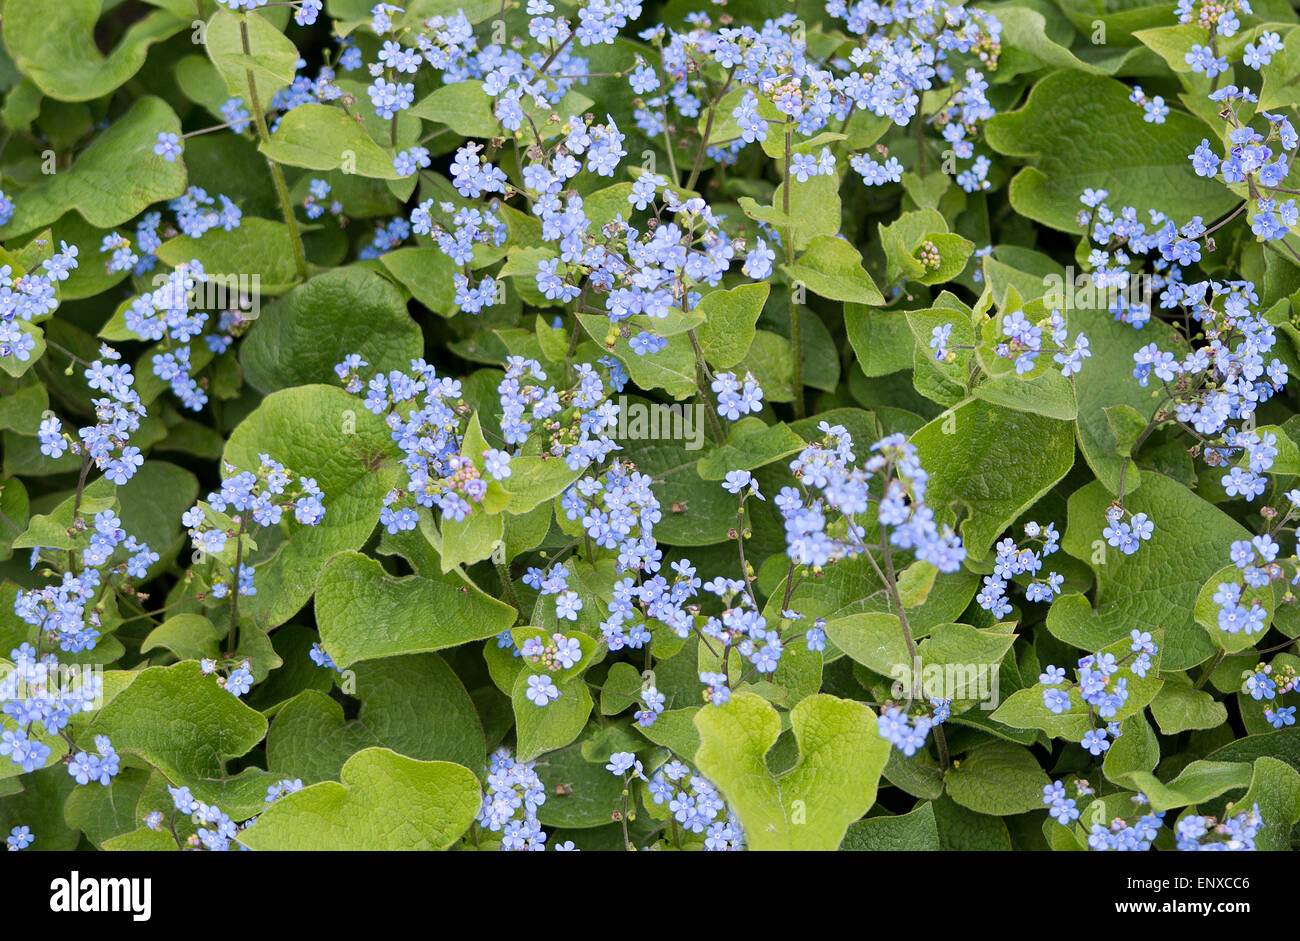 Blue forget-me-nots flowers (Myosotis scorpioides) with leaves in flowerbed in May. Stock Photo